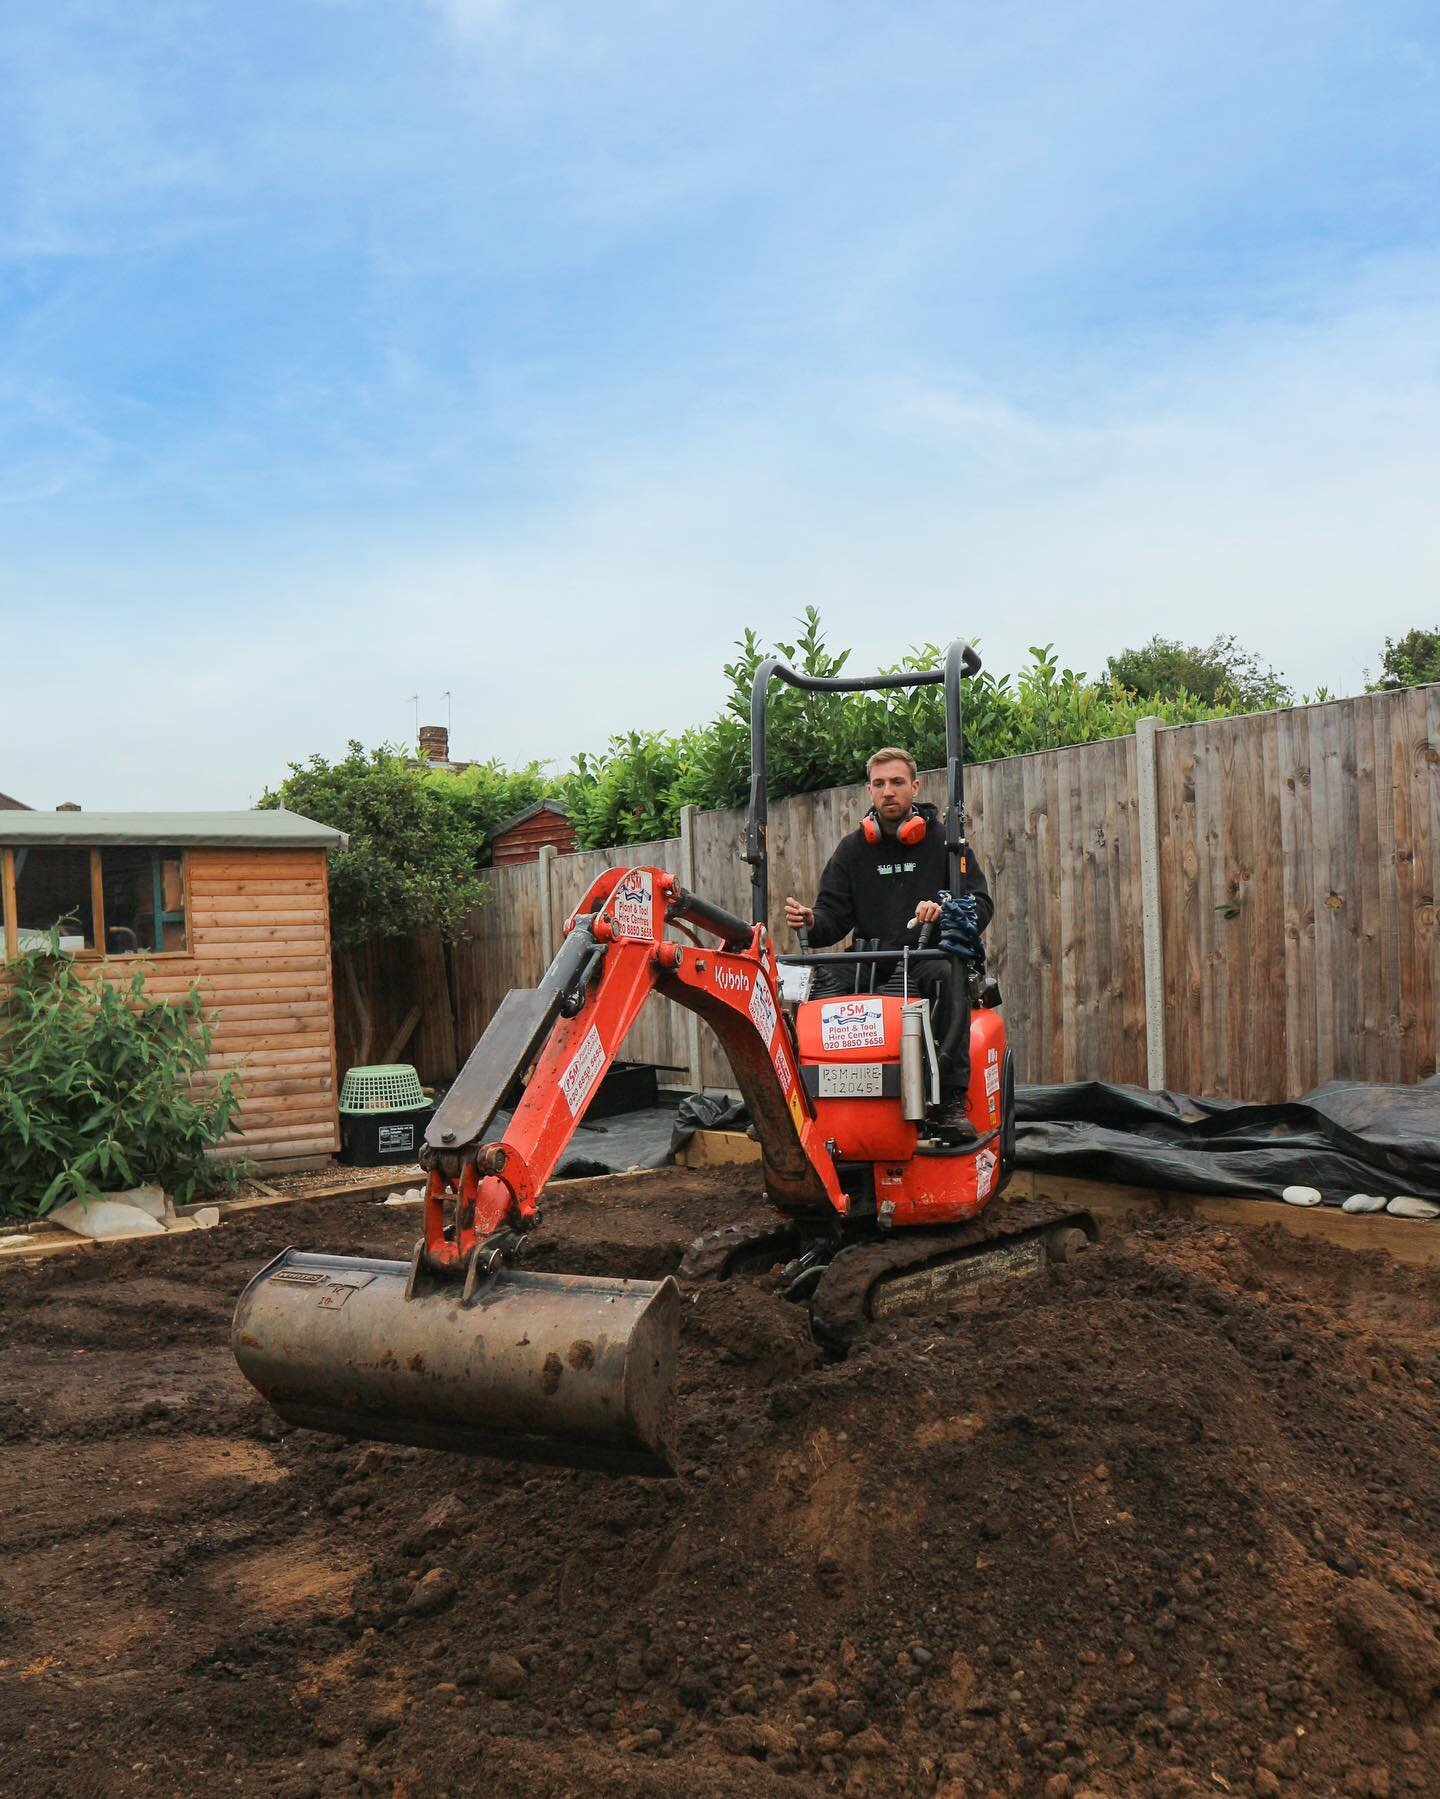 JSJ Gardening, based in Prestwood, provides South Buckinghamshire with a fully tailored professional service covering all aspects of maintenance and soft landscaping.

For more information visit our socials JSJ Gardening across all platforms (Faceboo